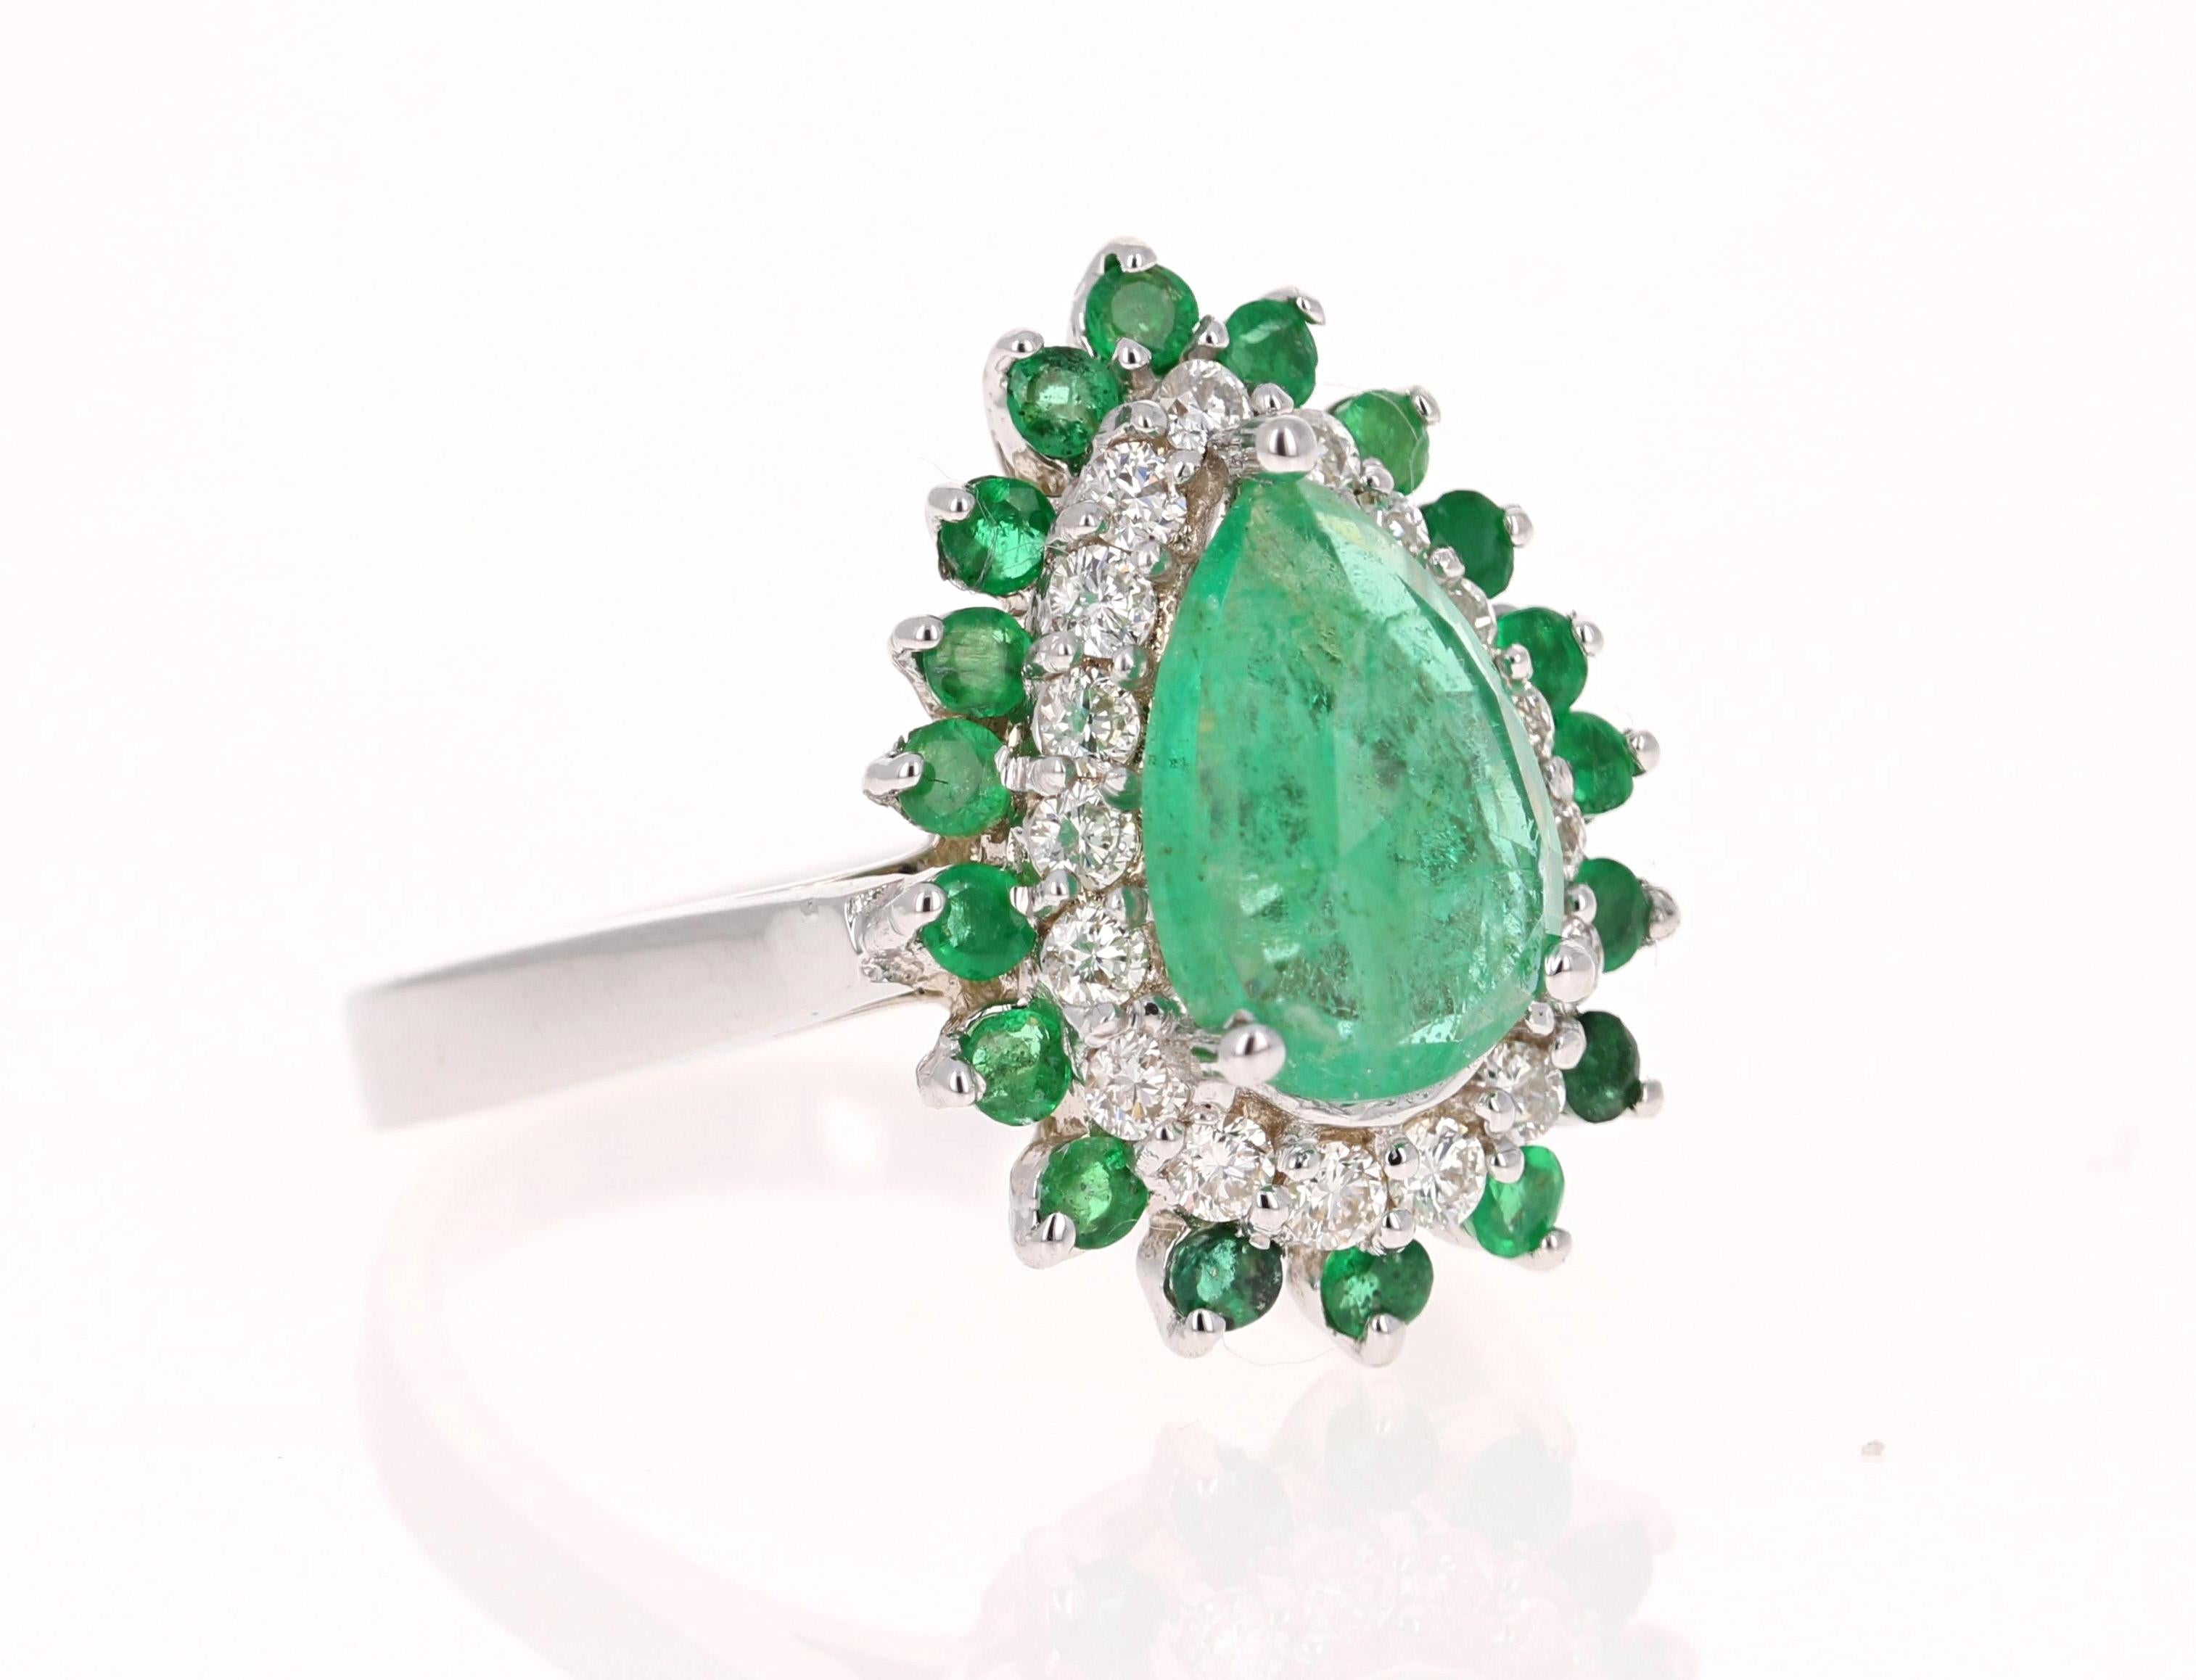 This Pear Cut Emerald ring has a 1.46 Carat Natural Emerald that measures at 7 mm x 9 mm. 
It is further embellished with 18 Emeralds that weigh 0.47 Carats and 18 Round Cut Diamonds that weigh 0.40 Carats. The total carat weight of the ring is 2.33